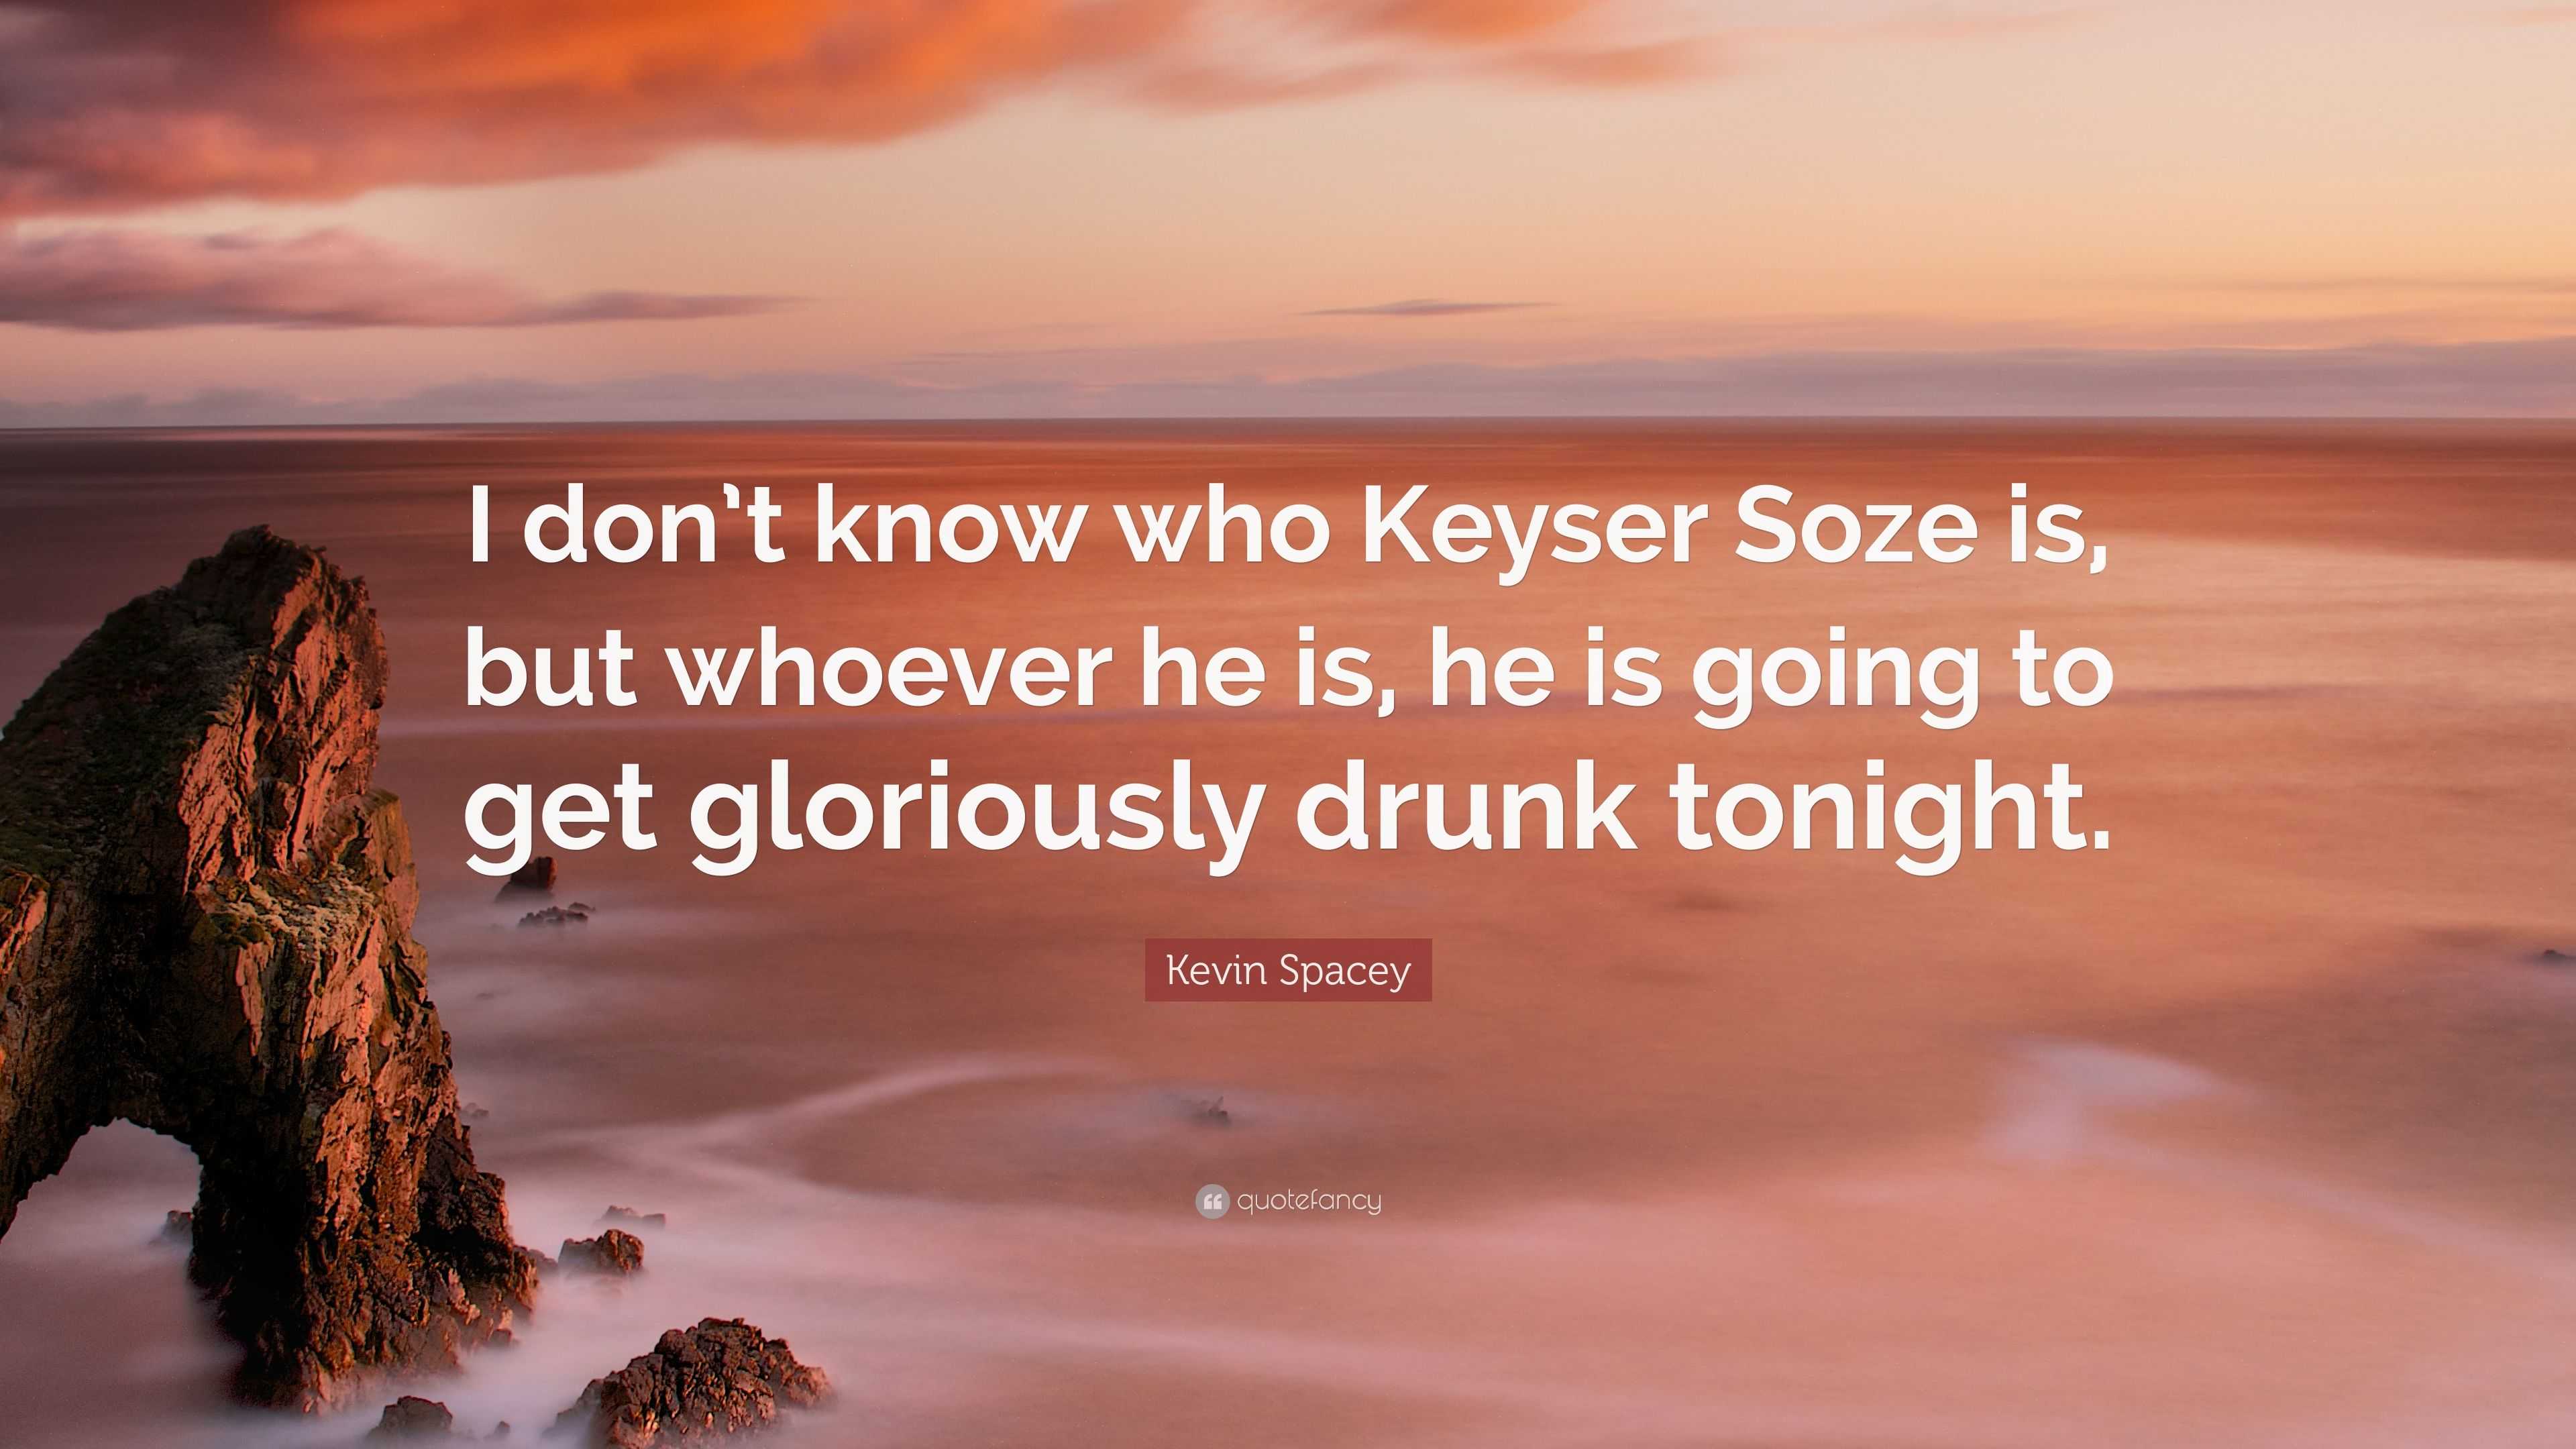 I don't know who Keyser Soze is, but whoever he is, he is going to